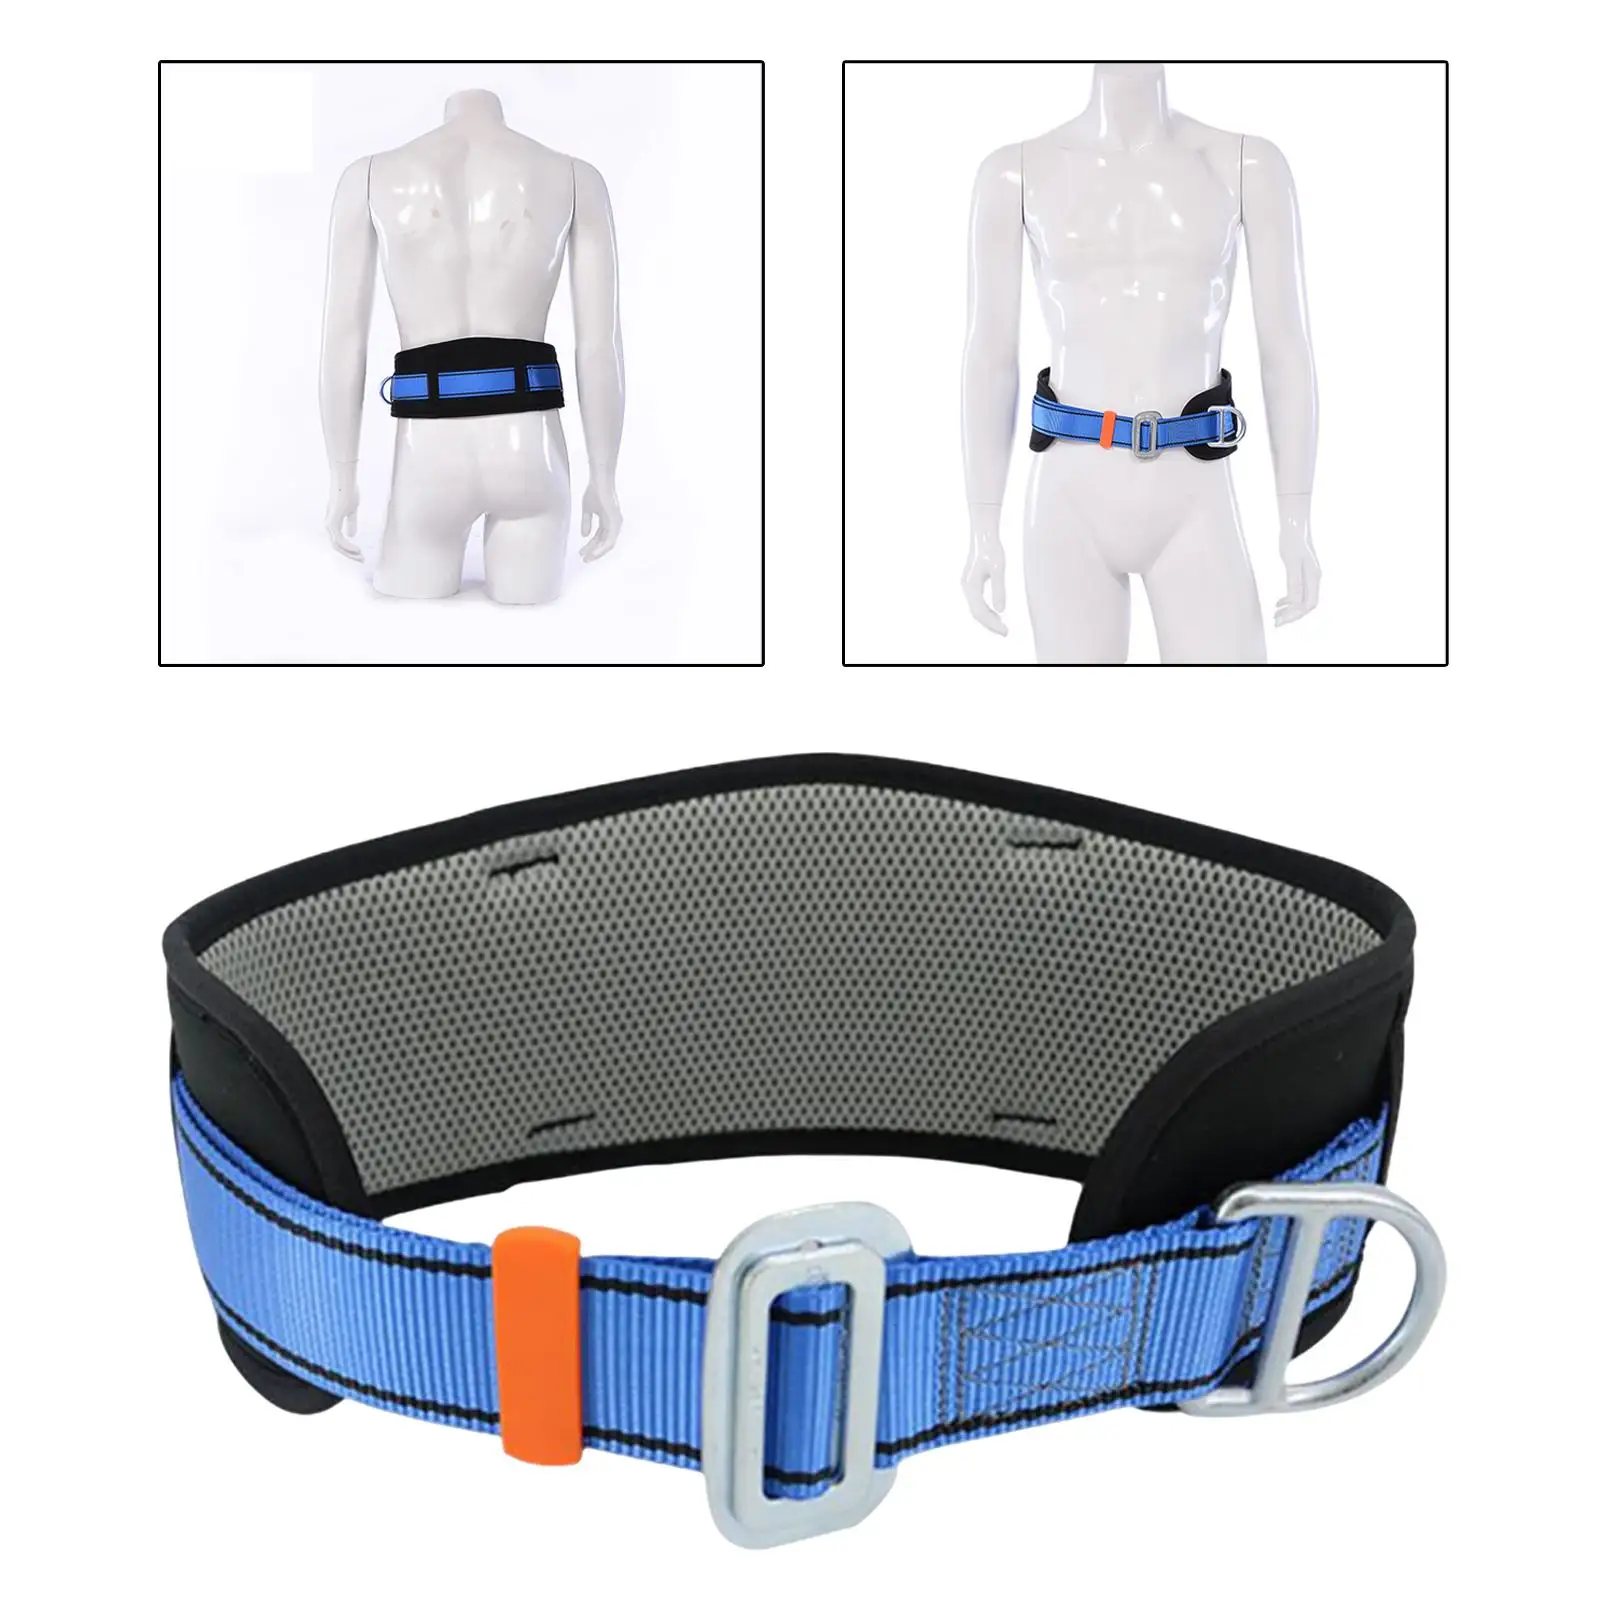 1x Single Hanging Point Lanyard Anti Falling Personal Waist Support Portable Safety Harness Belt for Aerial Work Climbing